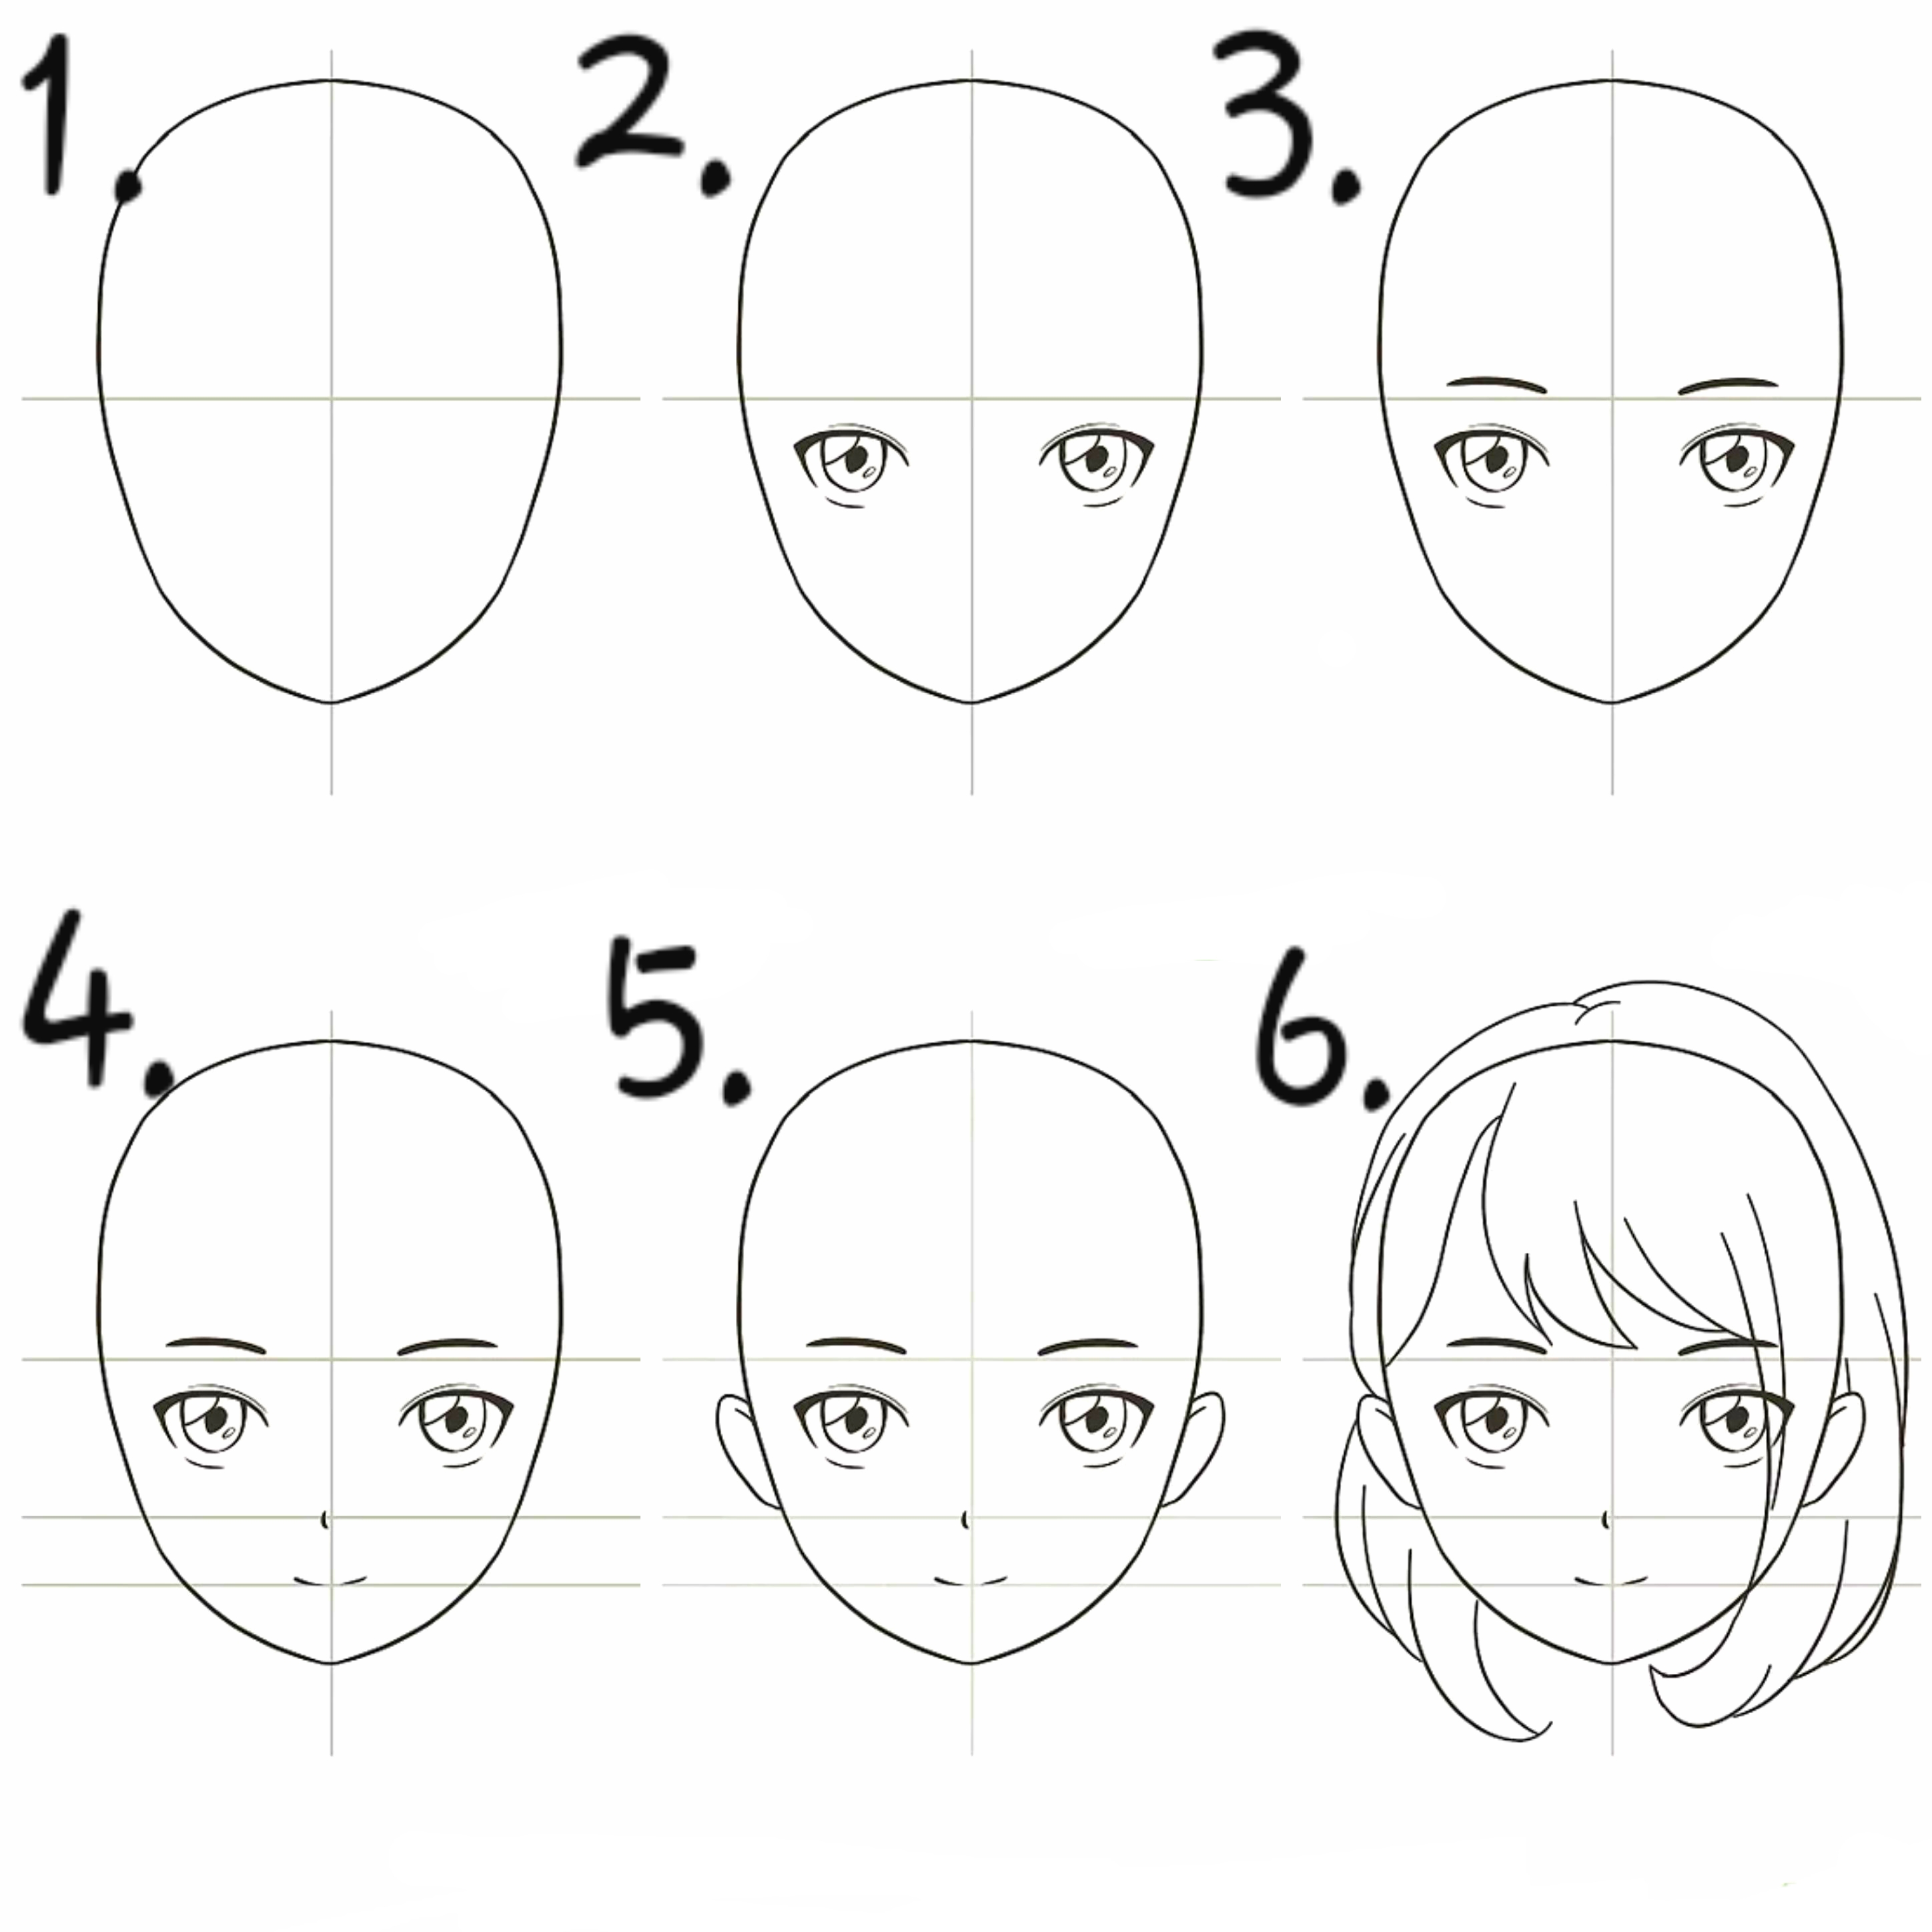 Details more than 70 anime head proportions latest - awesomeenglish.edu.vn